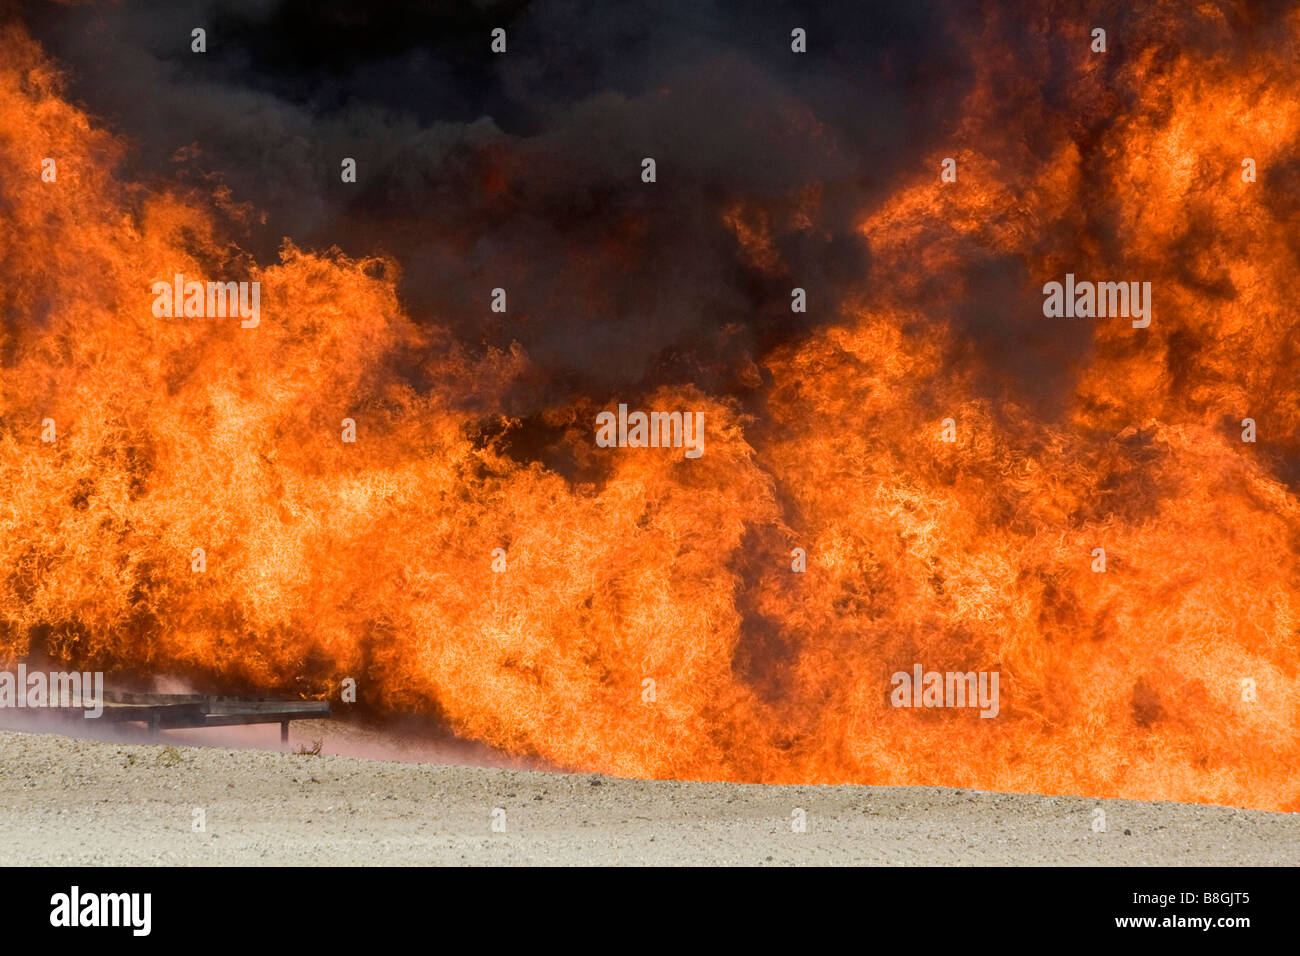 Jet fuel fire at an airport firefigher training facility in Boise Idaho USA Stock Photo